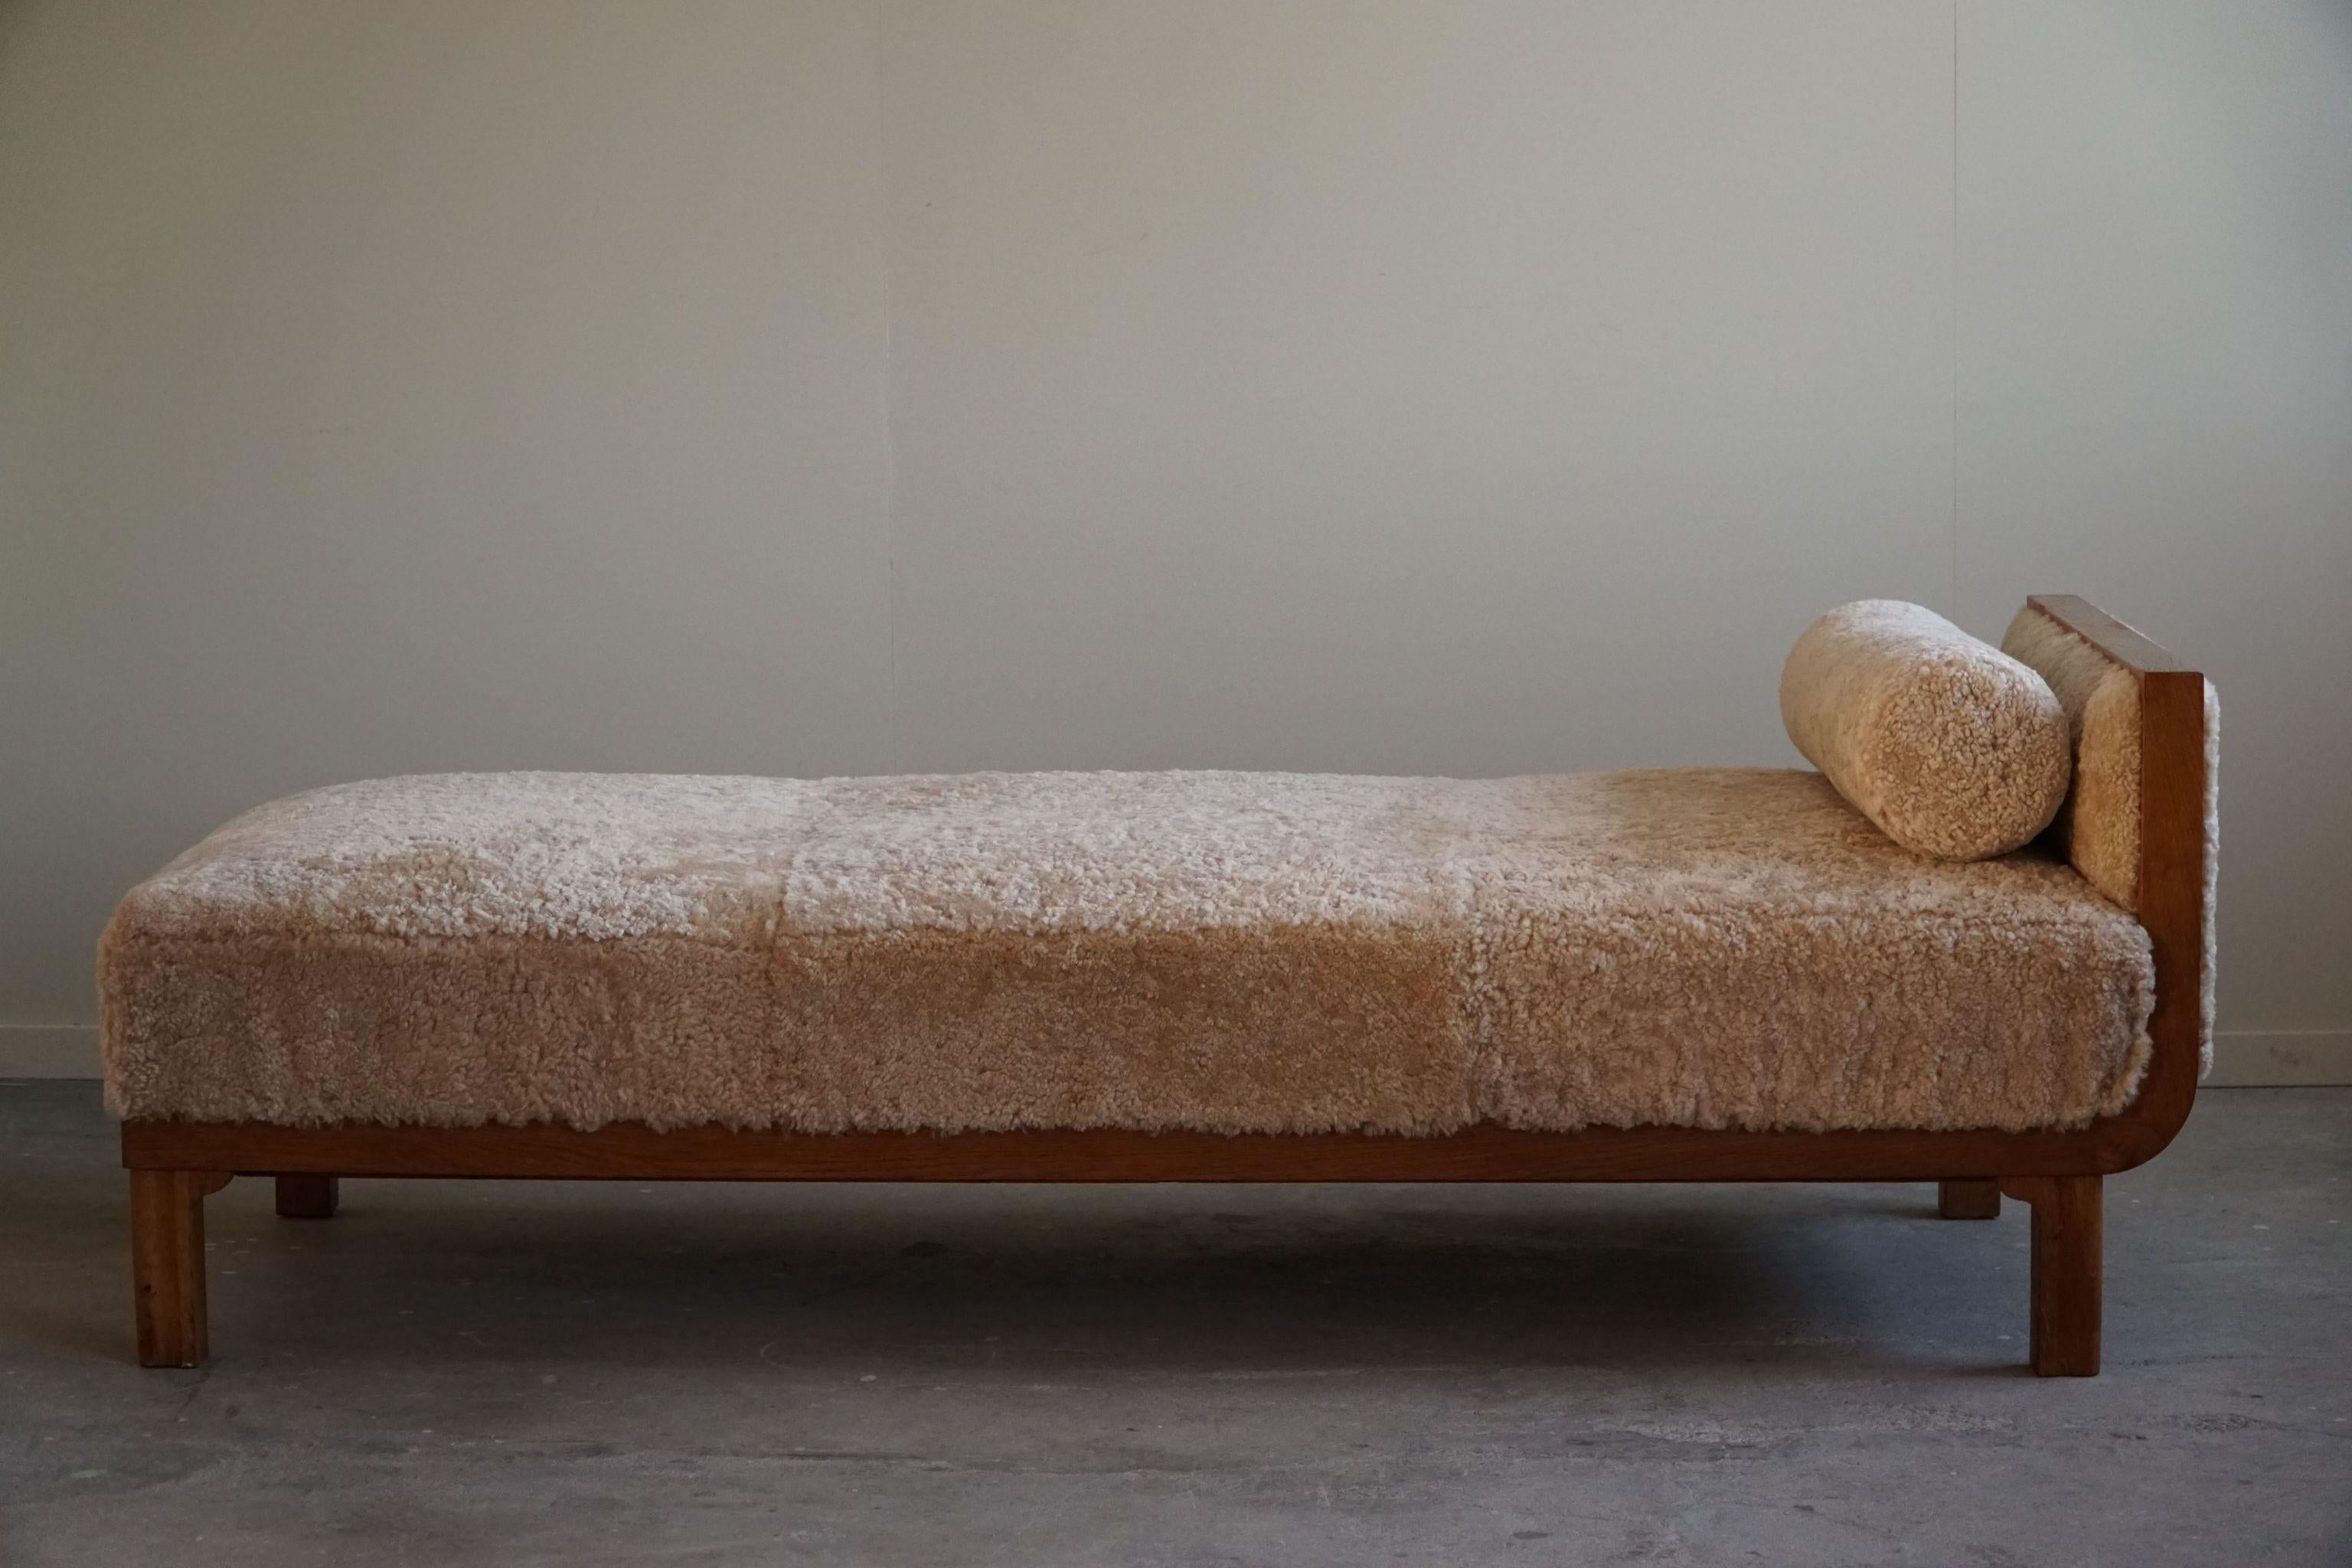 Art Deco Oak Daybed Reupholstered in Lambswool, By a Danish Cabinetmaker, 1940s For Sale 10